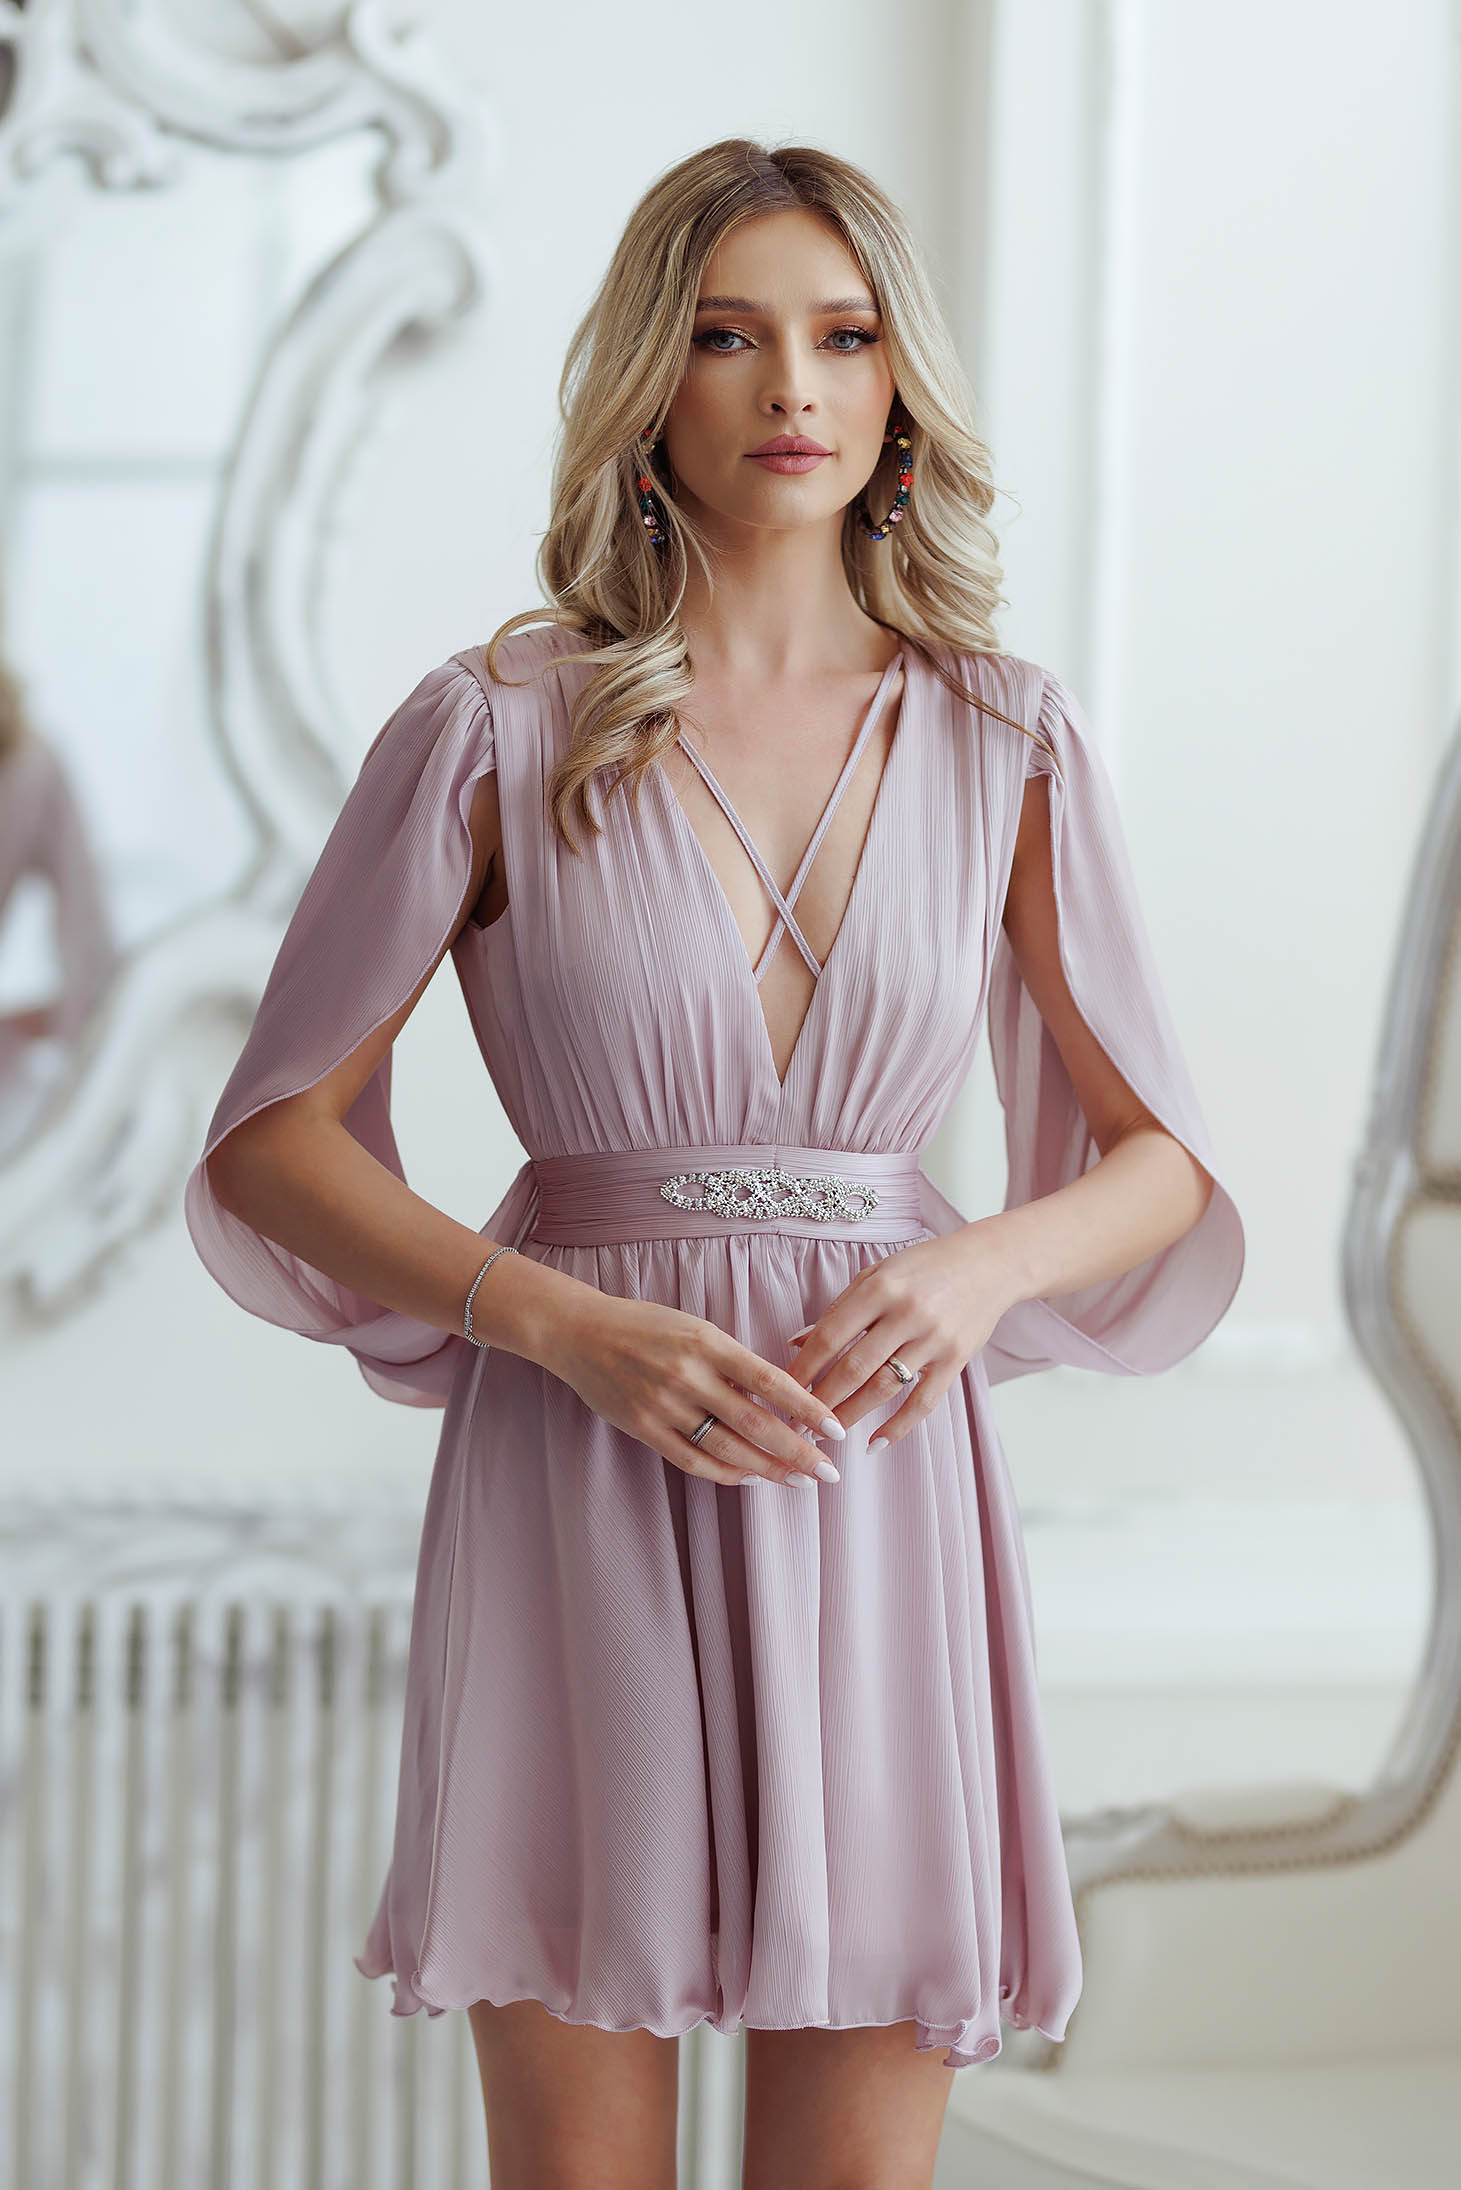 Lightpink dress from veil fabric cloche with embellished accessories